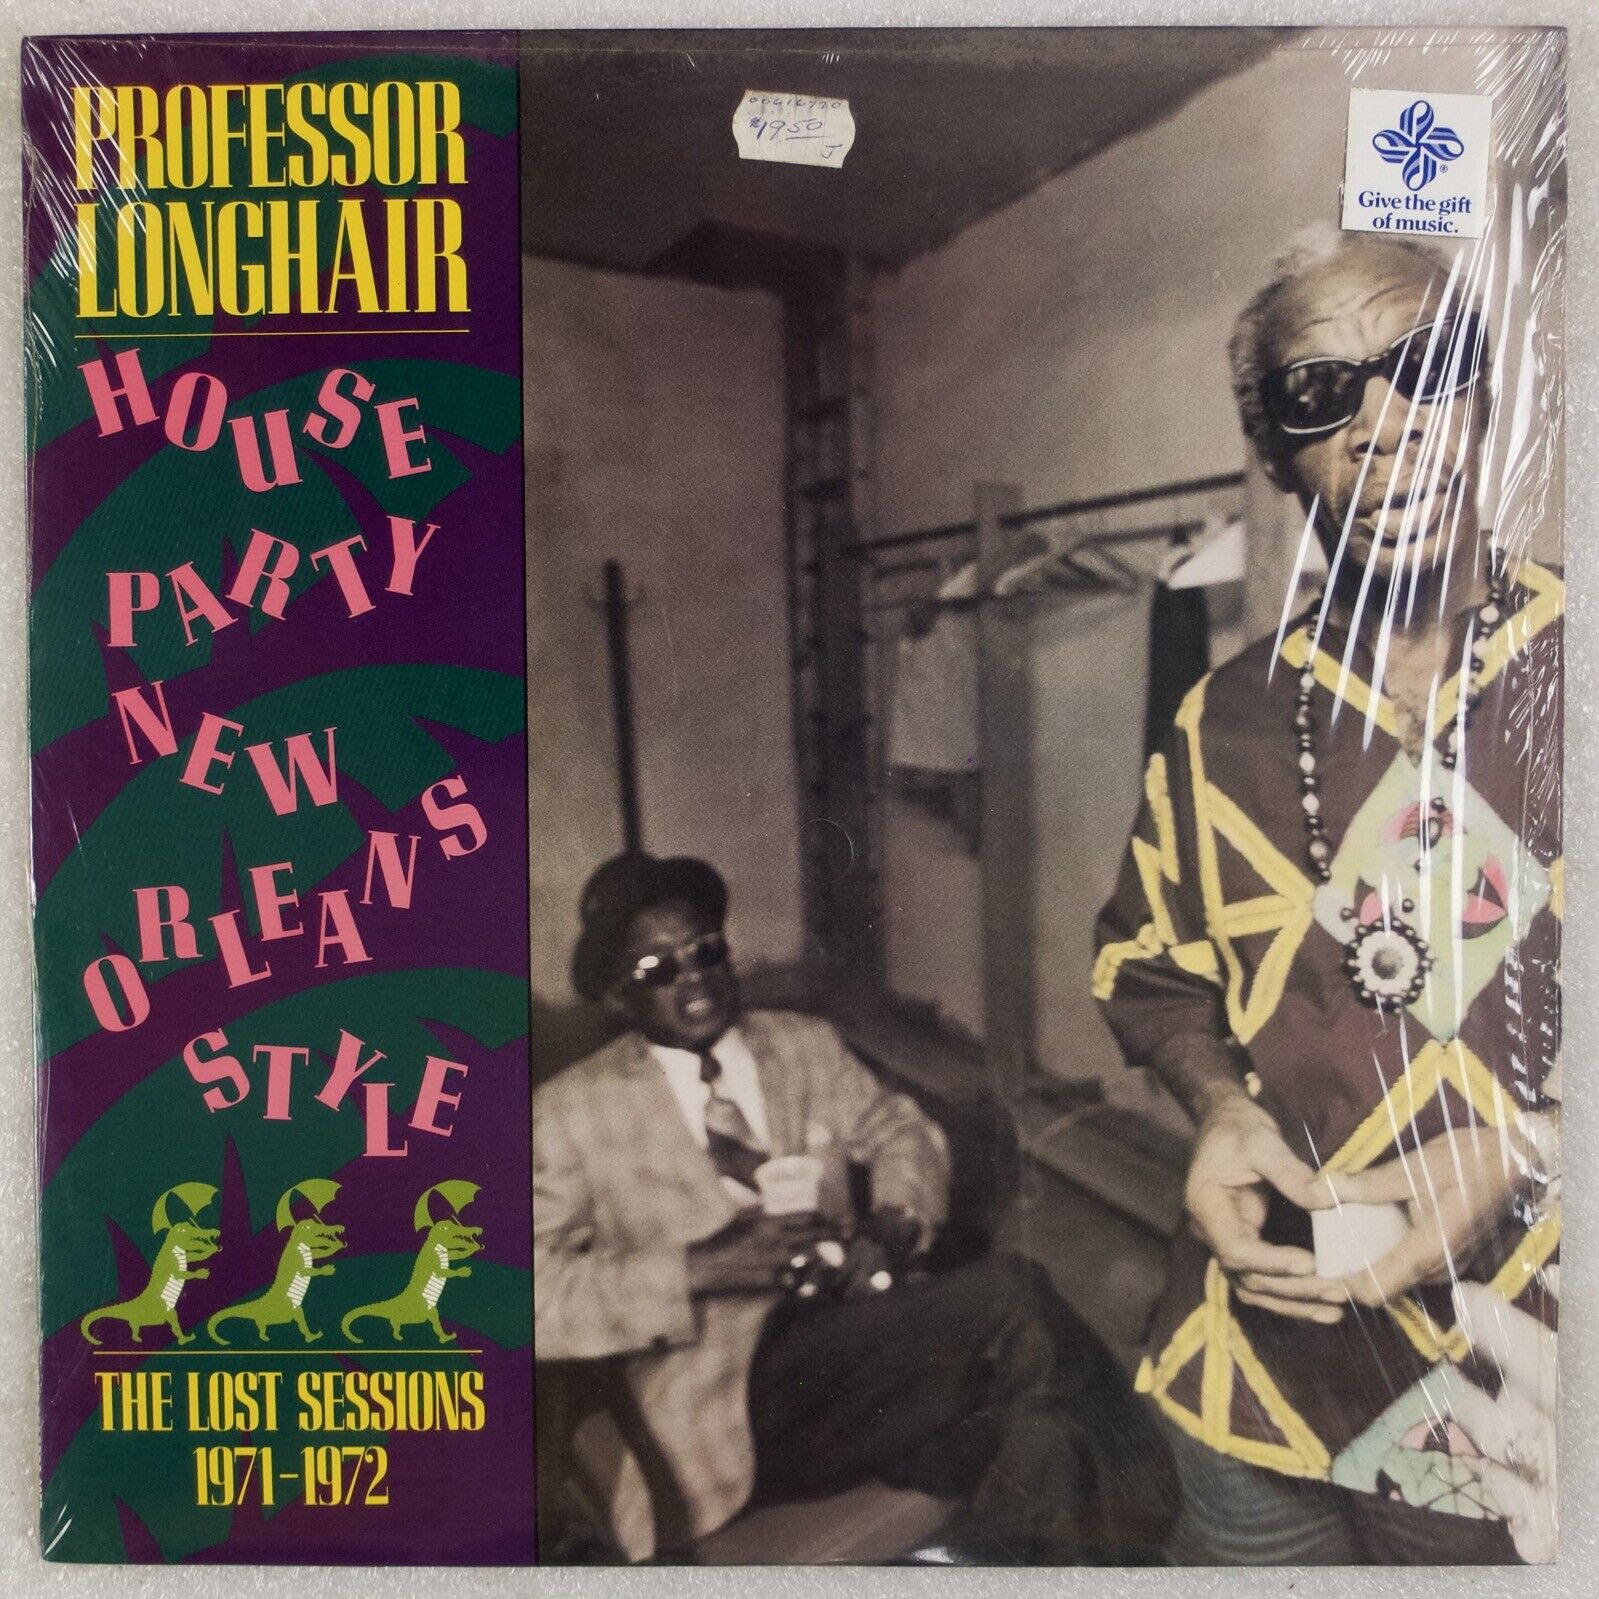 Professor Longhair House Party New Orleans Style Wallpaper